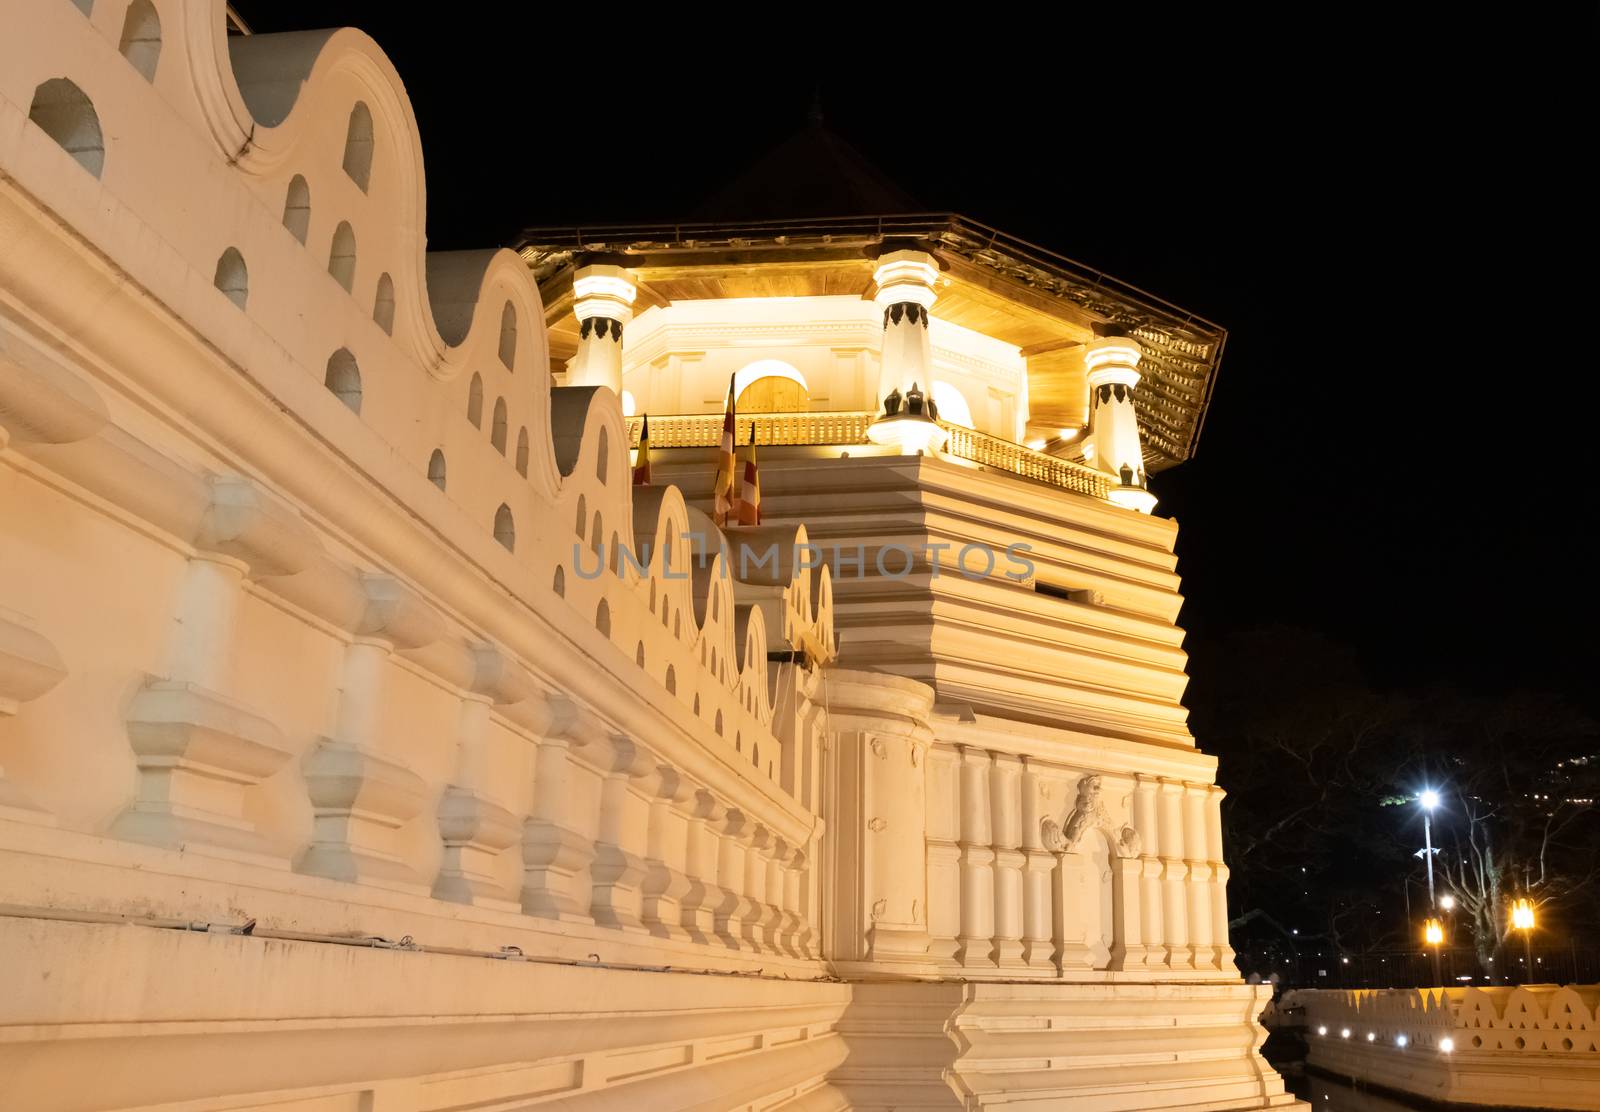 Sri Dalada Maligawa or the Temple of the Sacred Tooth Relic is a Buddhist temple in the city of Kandy, Sri Lanka. It is located in the royal palace complex of the former Kingdom of Kandy, which houses the relic of the tooth of the Buddha.